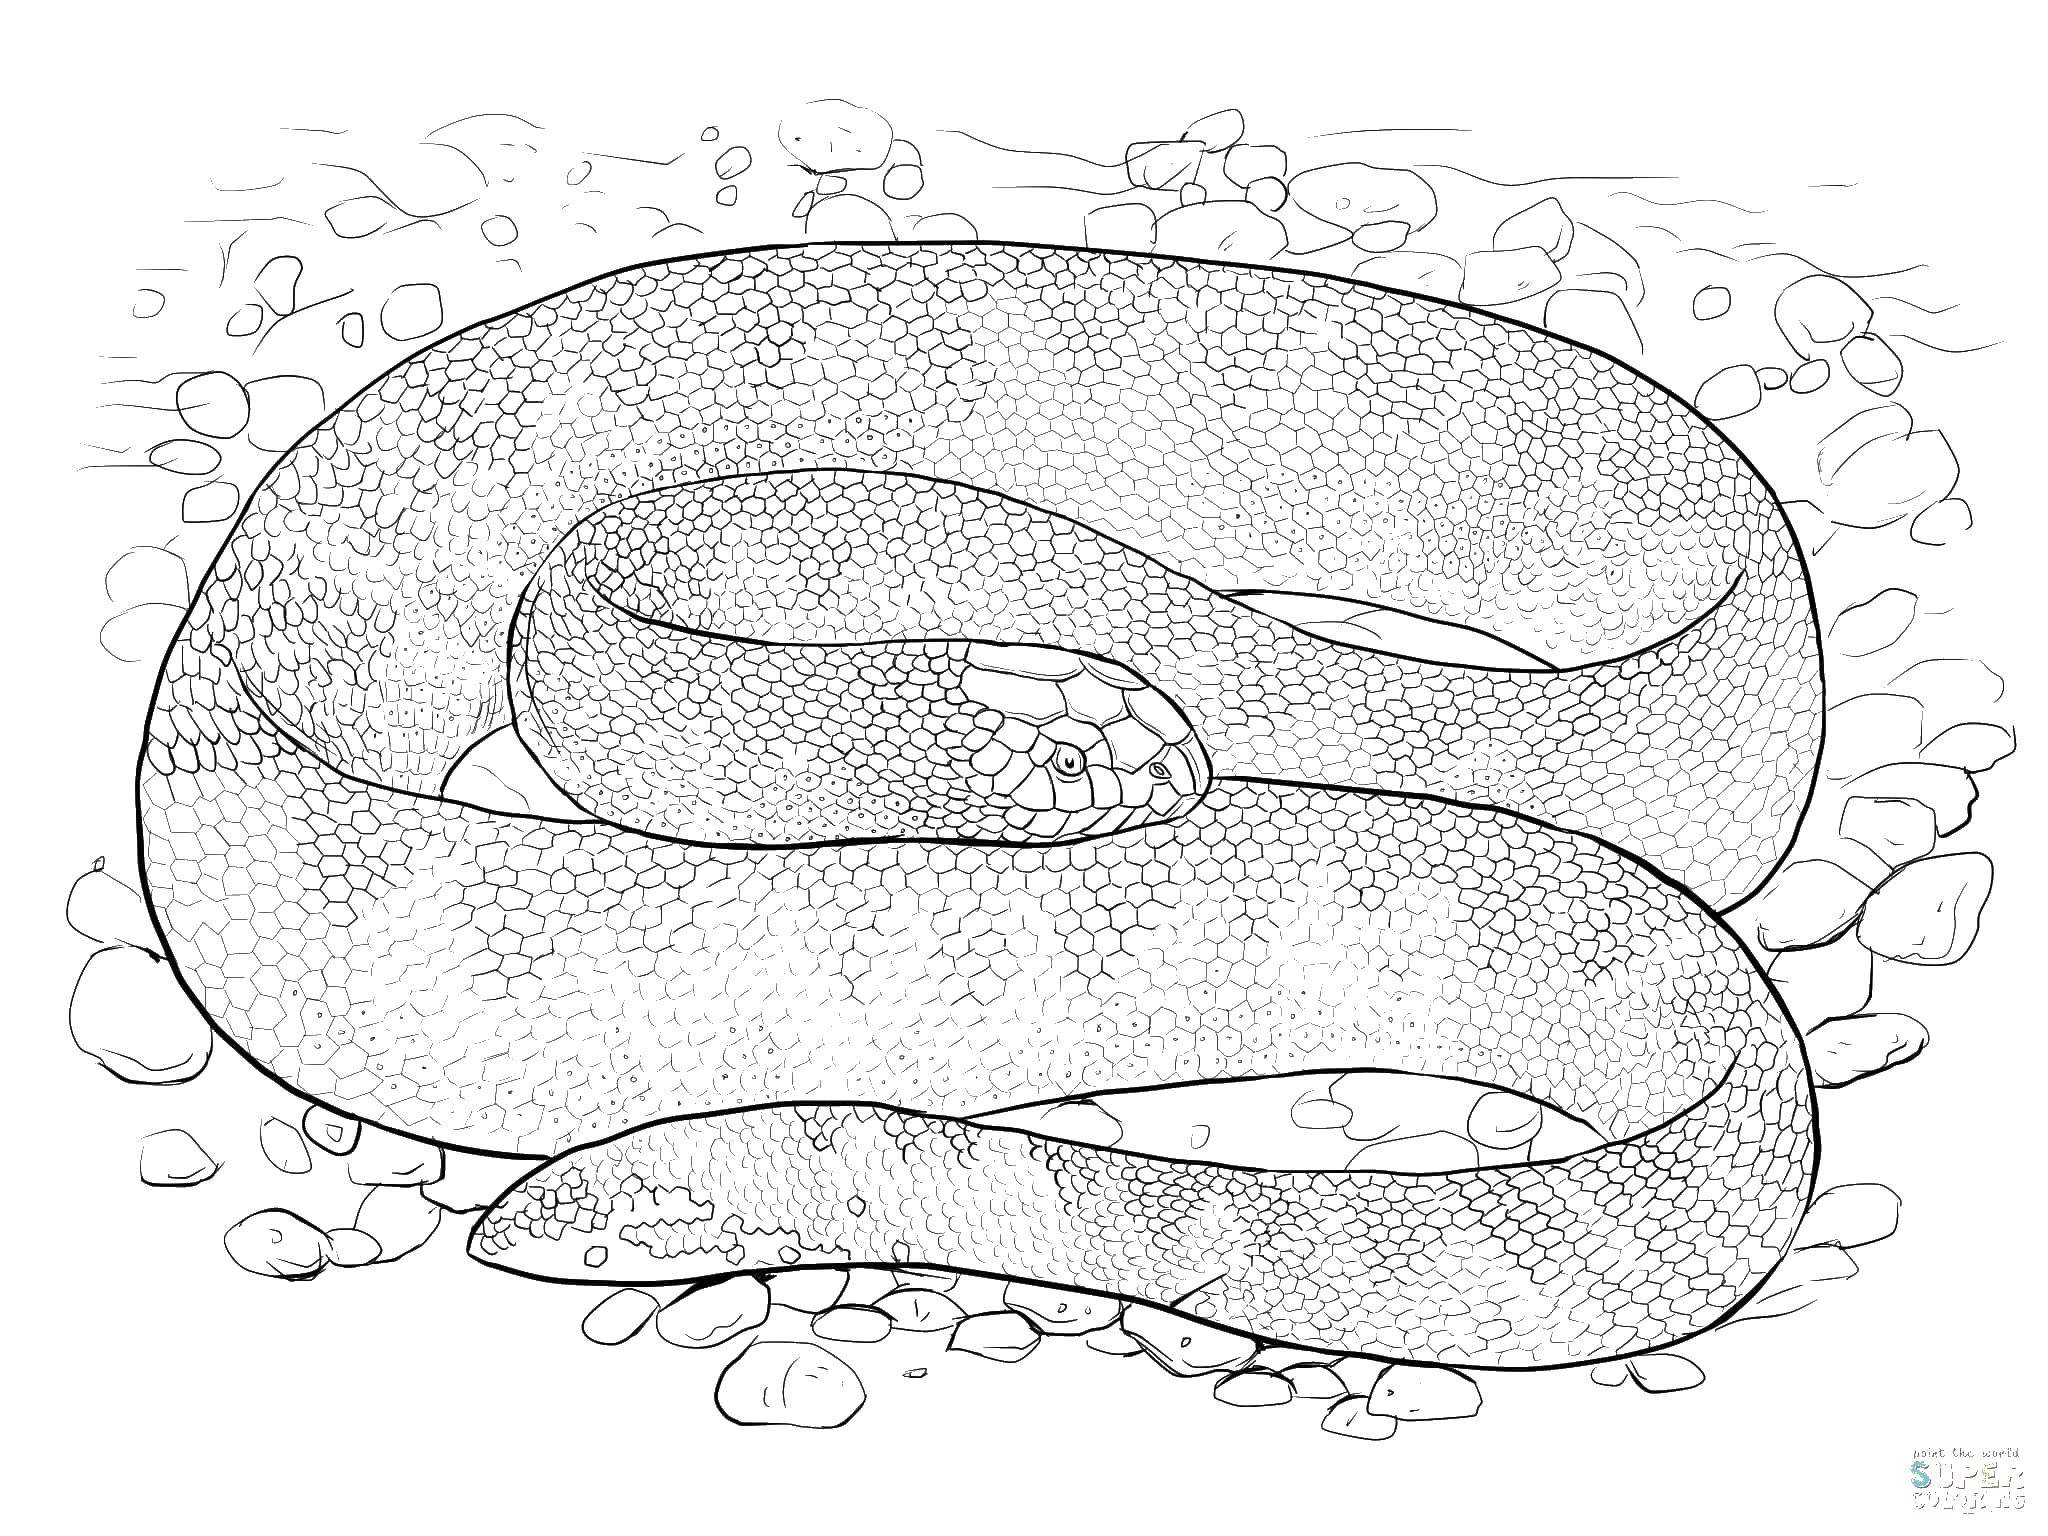 Coloring Snake. Category snake. Tags:  snakes, snake, scales.